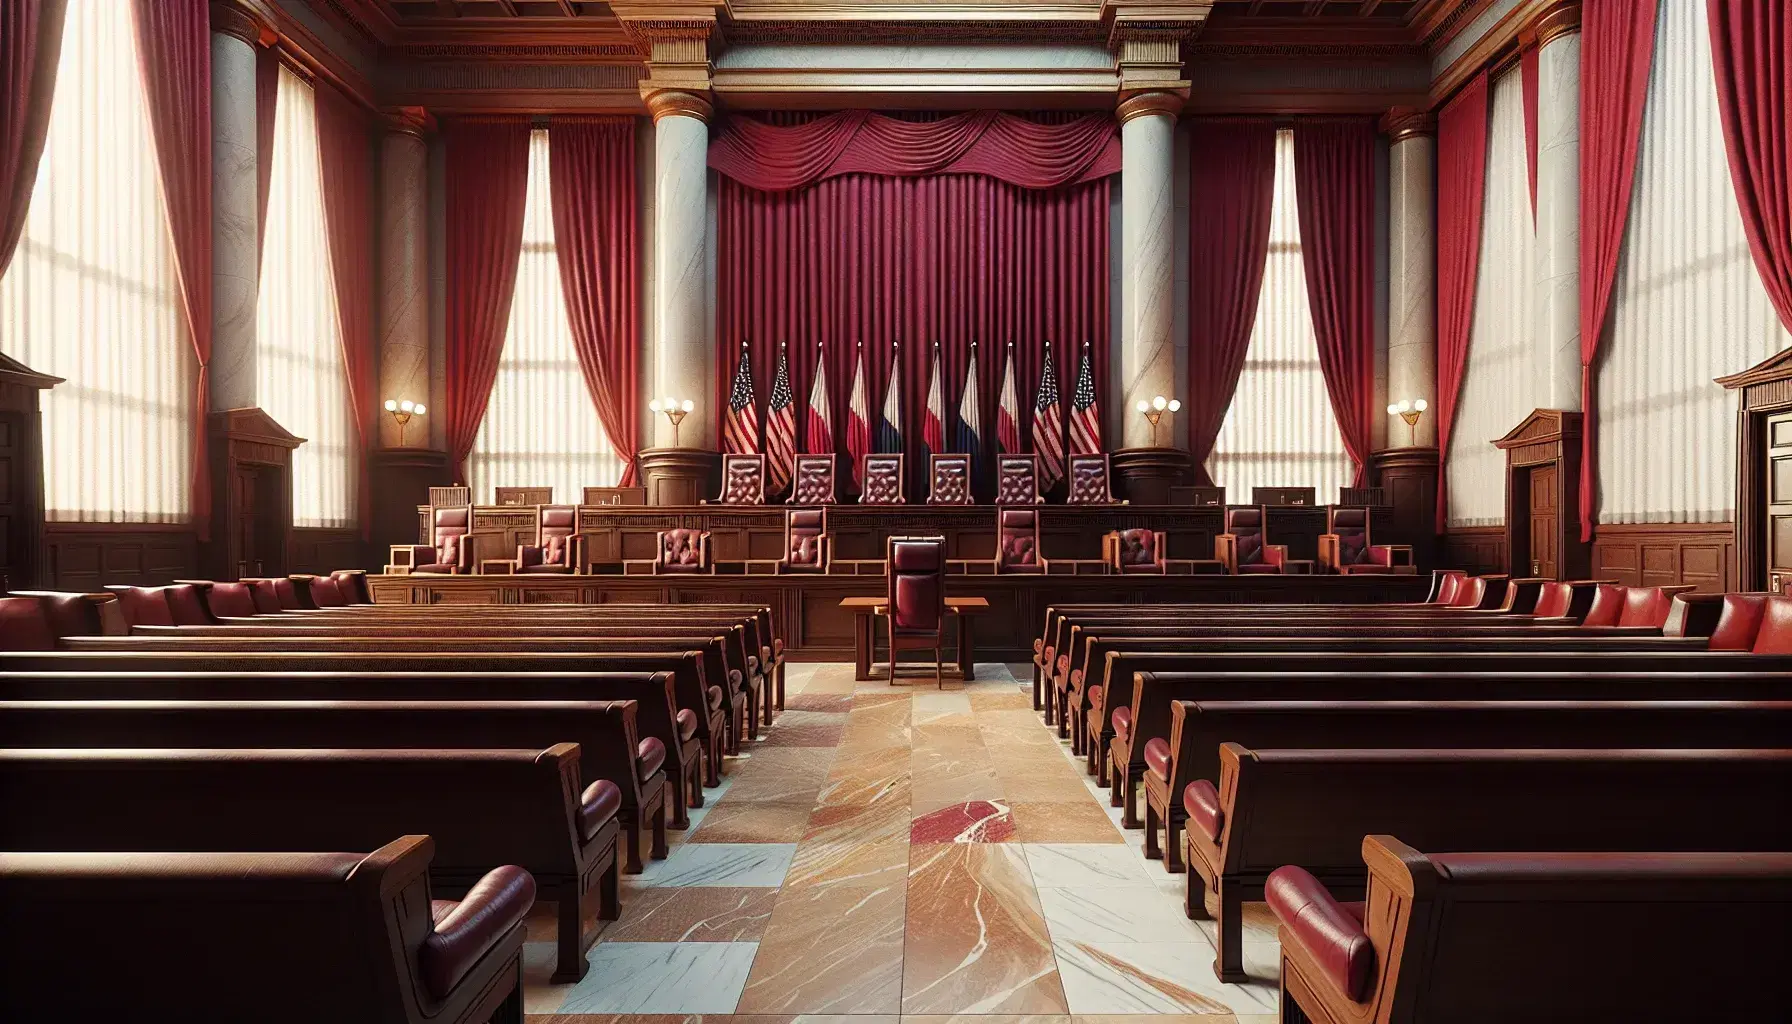 Elevated dark wood bench with nine burgundy chairs, red drapery, and American flag in a formal courtroom with marble columns and wooden pews.